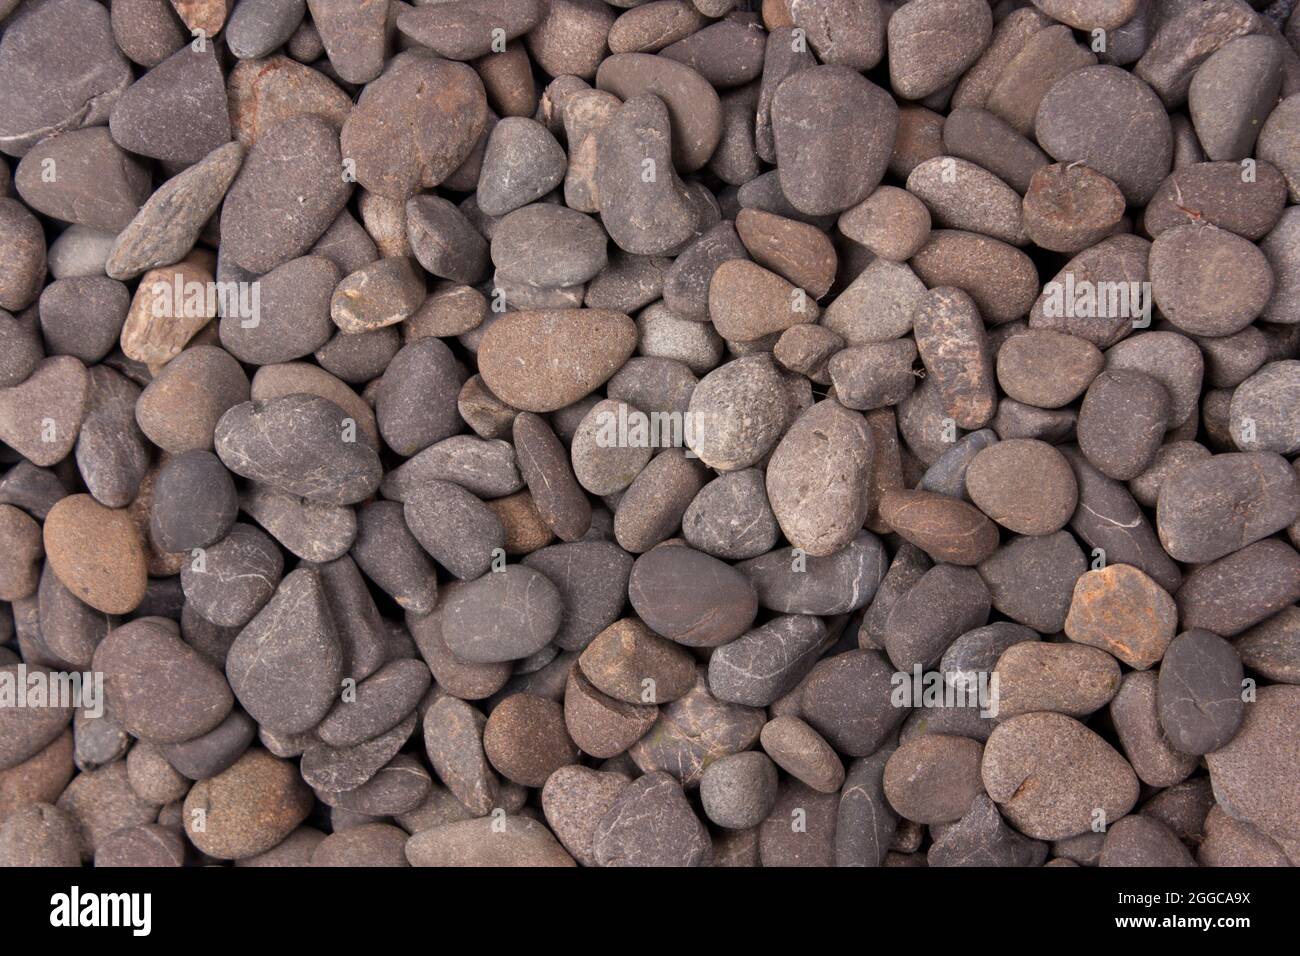 Small pebbles background Stock Photo